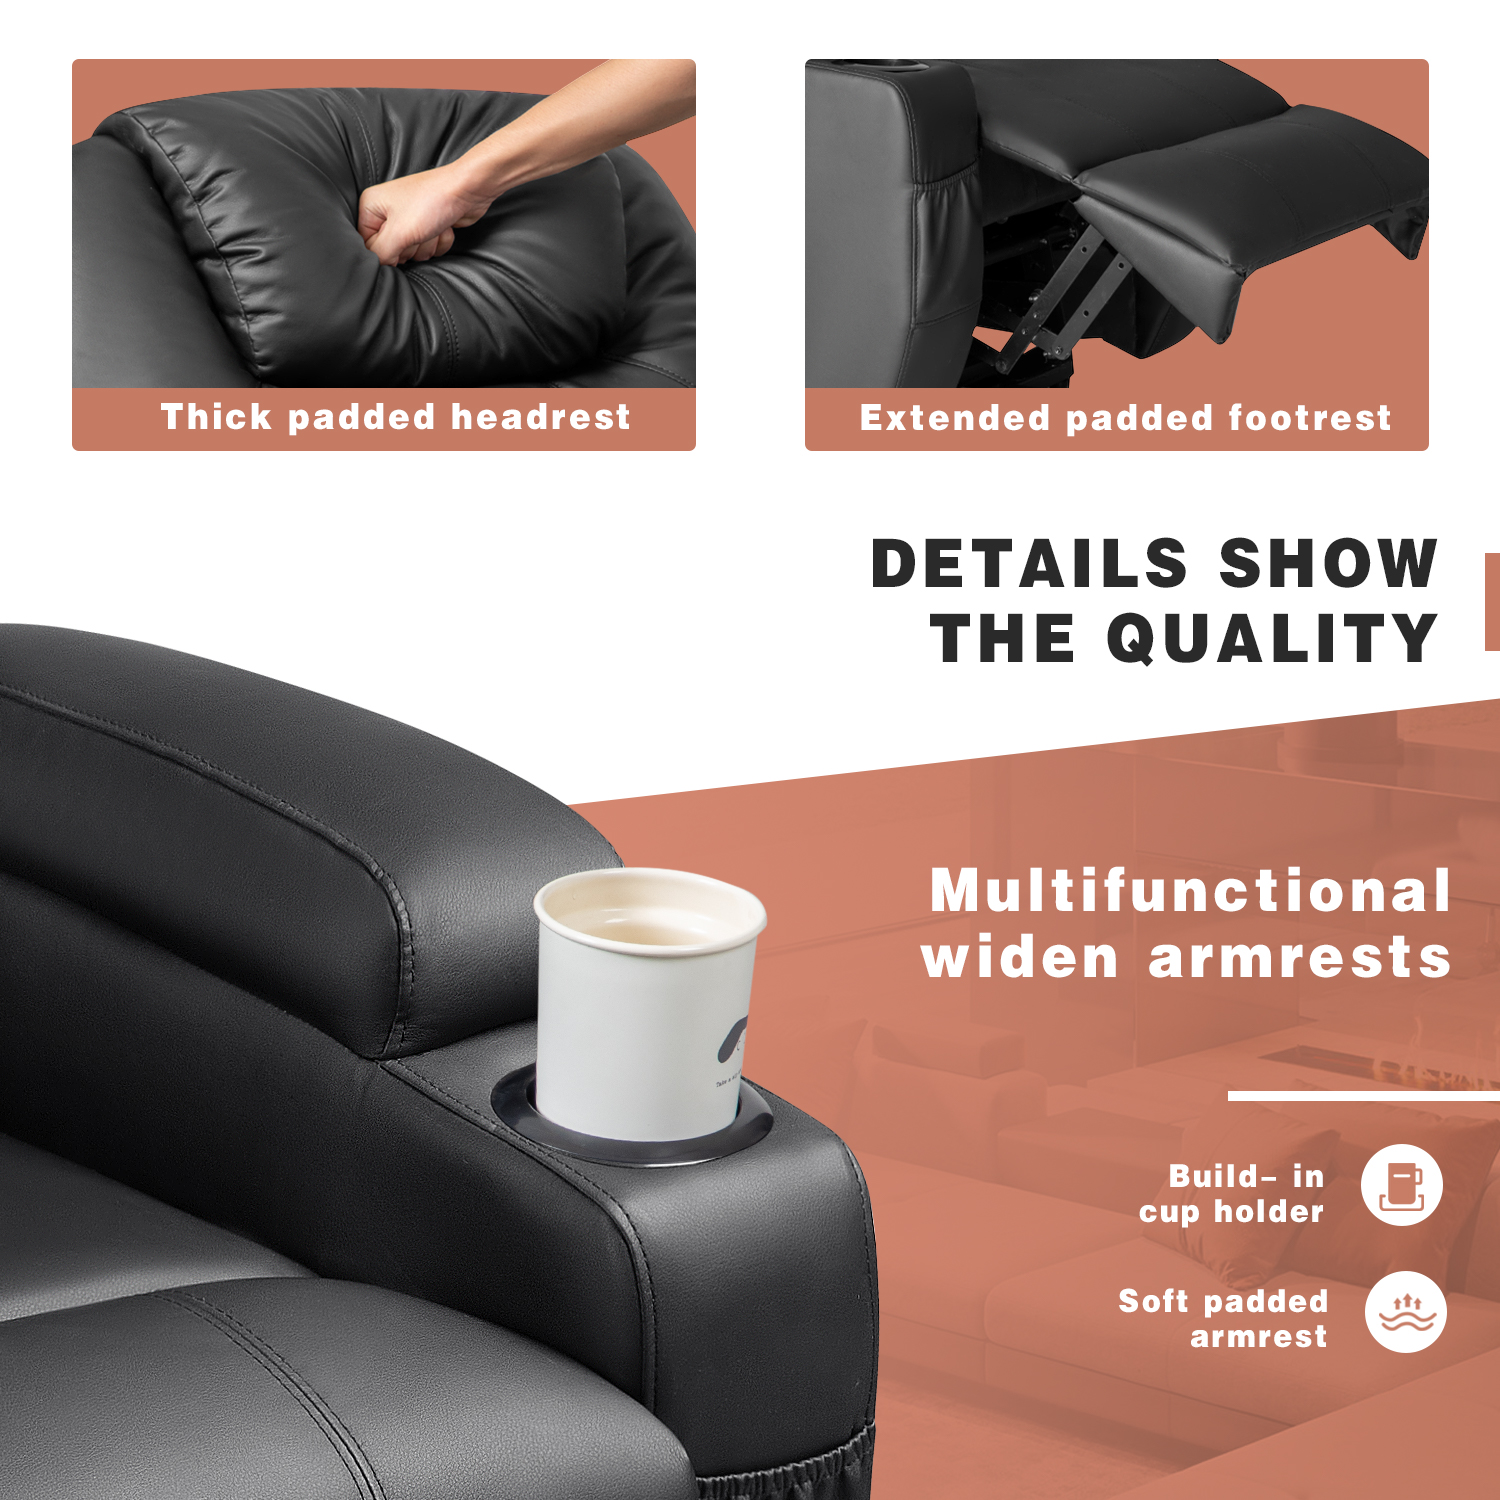 Lacoo Power Lift Recliner with Massage and Heat, Black Faux Leather - image 3 of 8